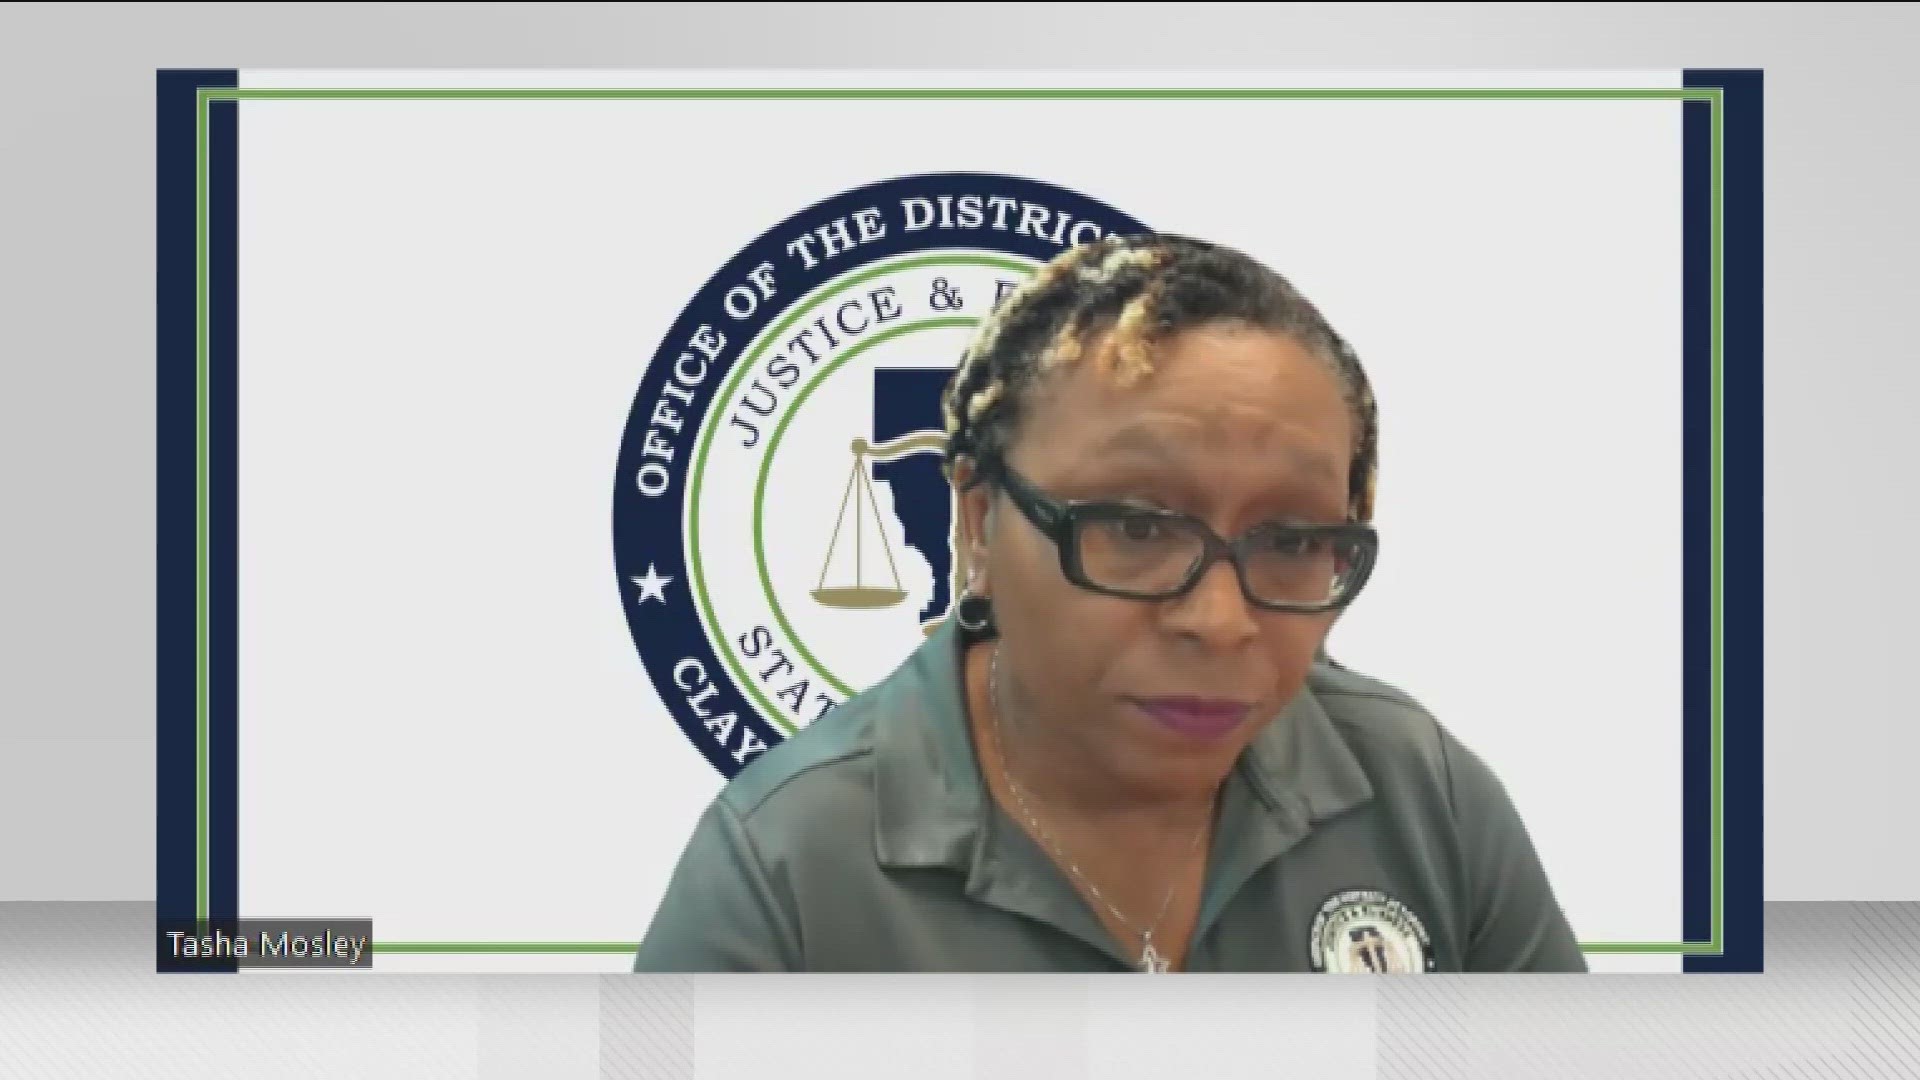 DA Mosley said the County has a backlog of cases dating back to 2020 and hopes pay hikes will encourage more people to serve as jurors and bailiffs.